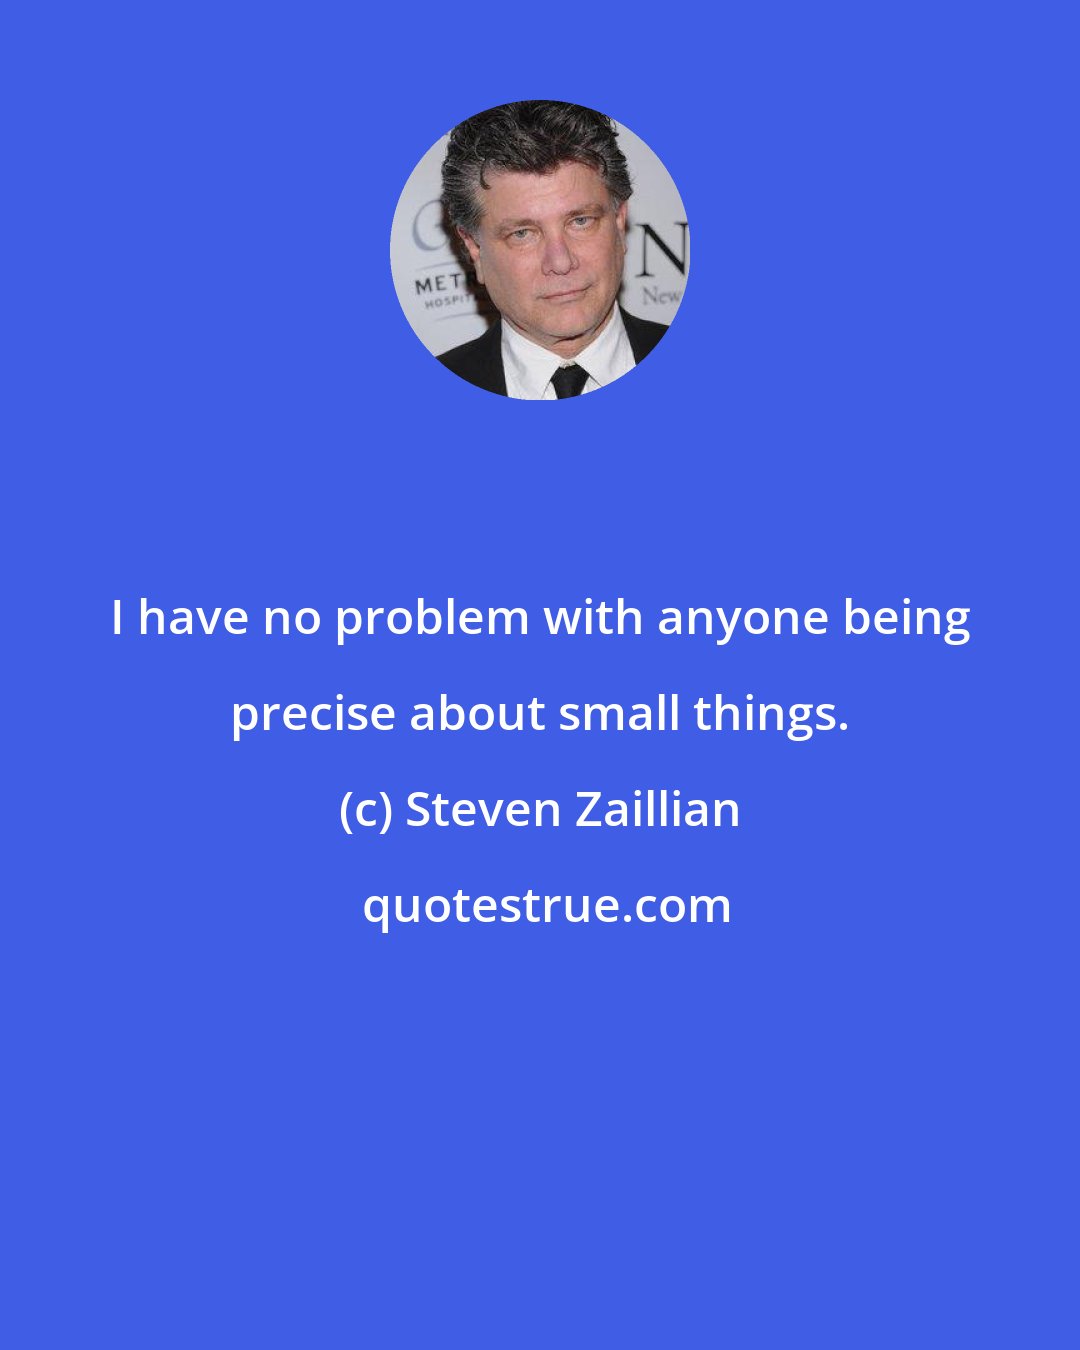 Steven Zaillian: I have no problem with anyone being precise about small things.